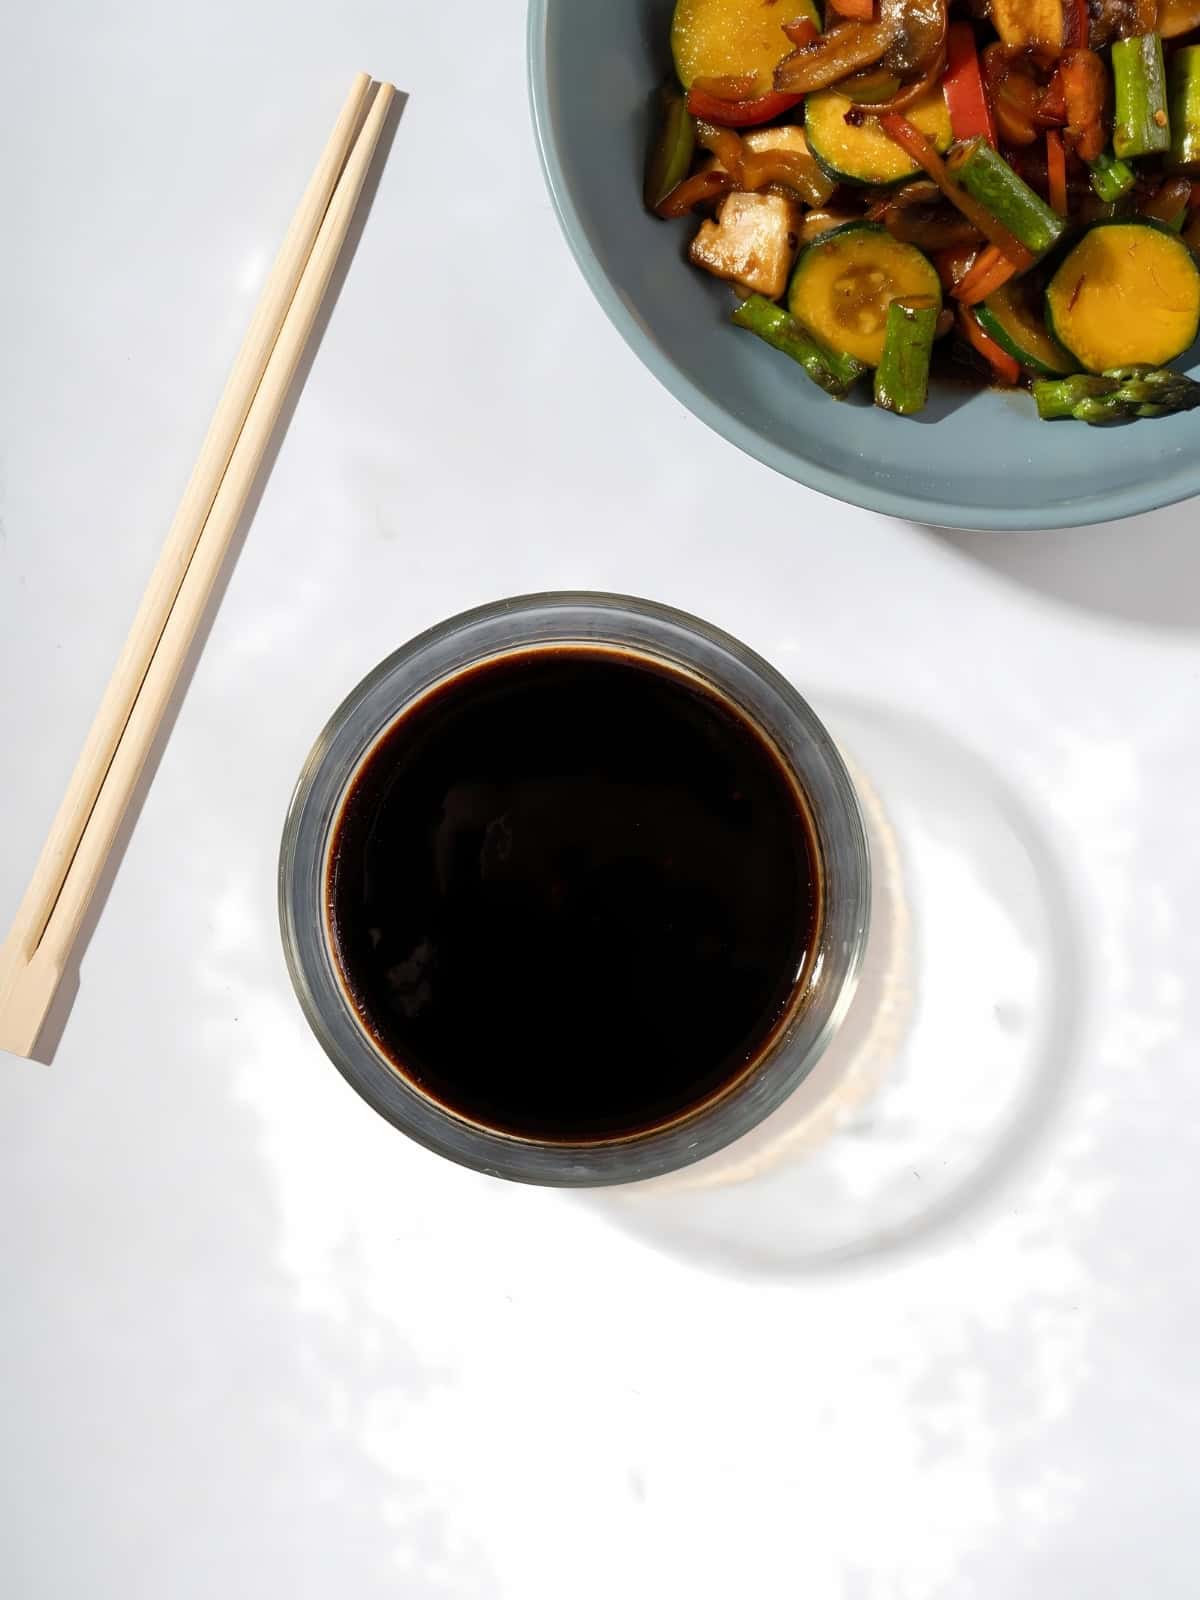 A small sauce bowl of vegan stir-fry sauce next to a bowl of fried vegetables and a pair of chopsticks.